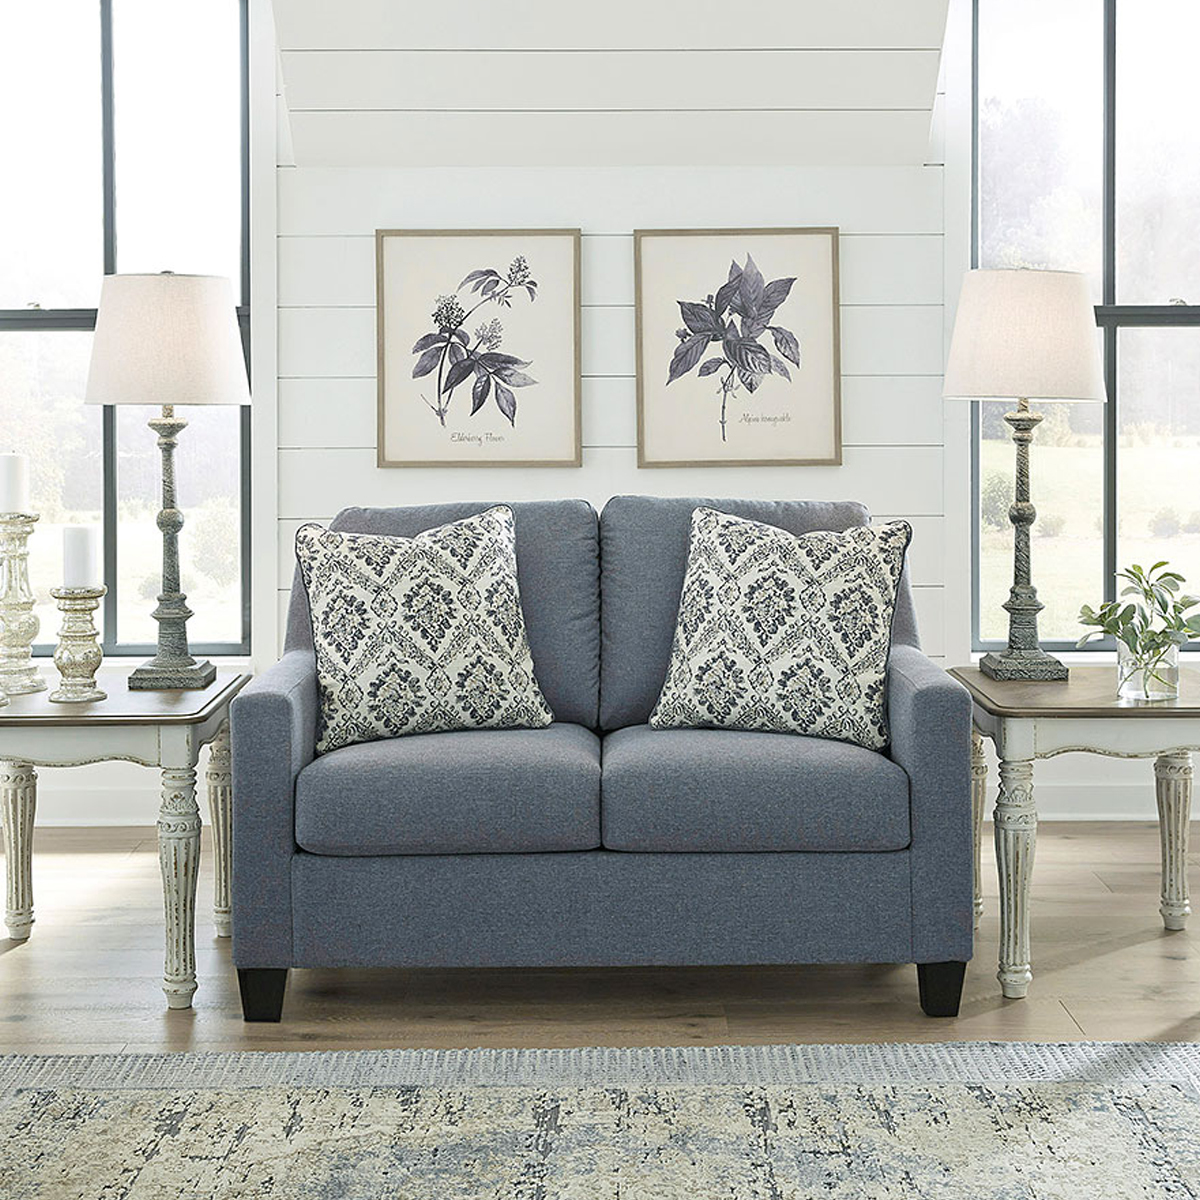 Picture of LESLIE LOVESEAT